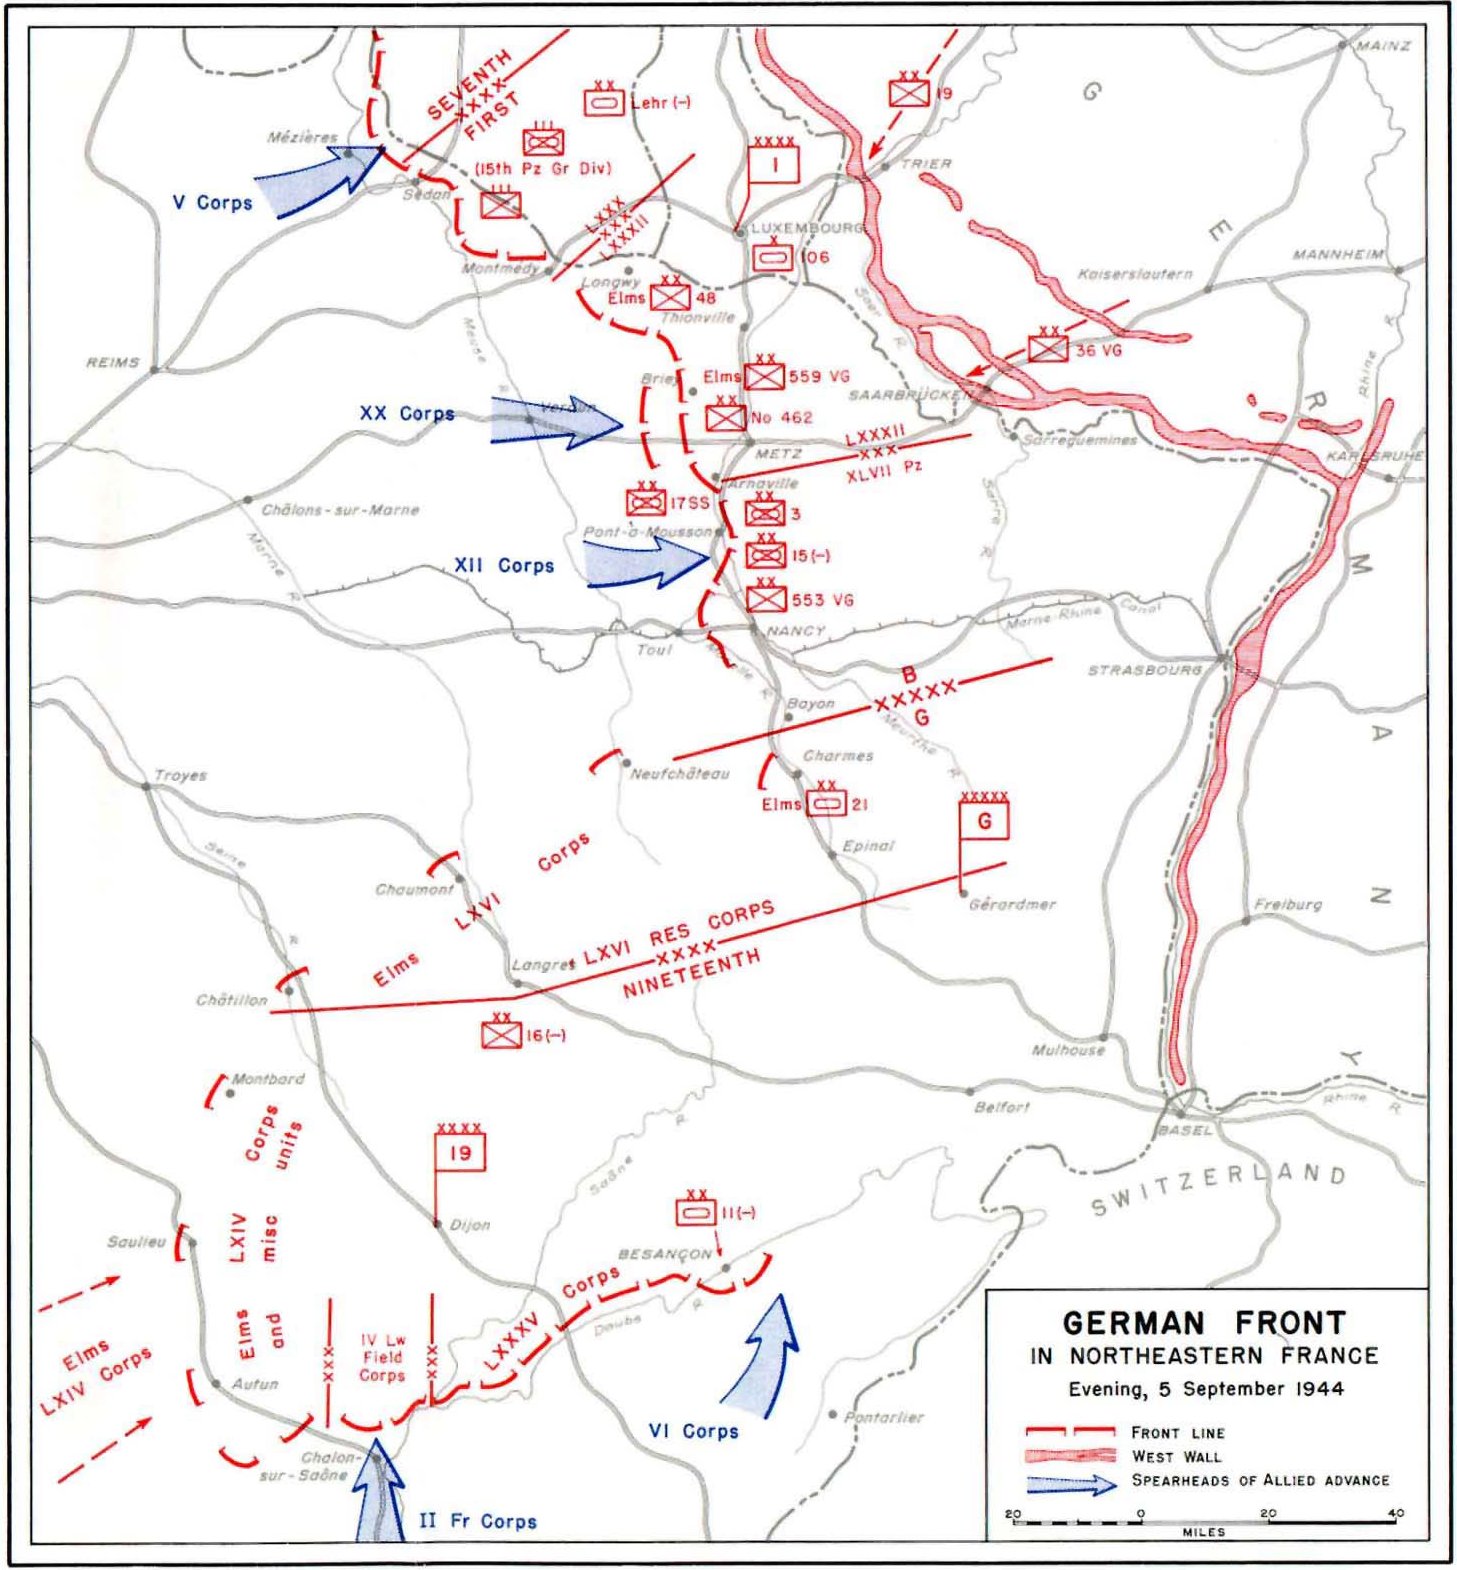 Map depicting the German front in Northeastern France, 5 Sep 1944